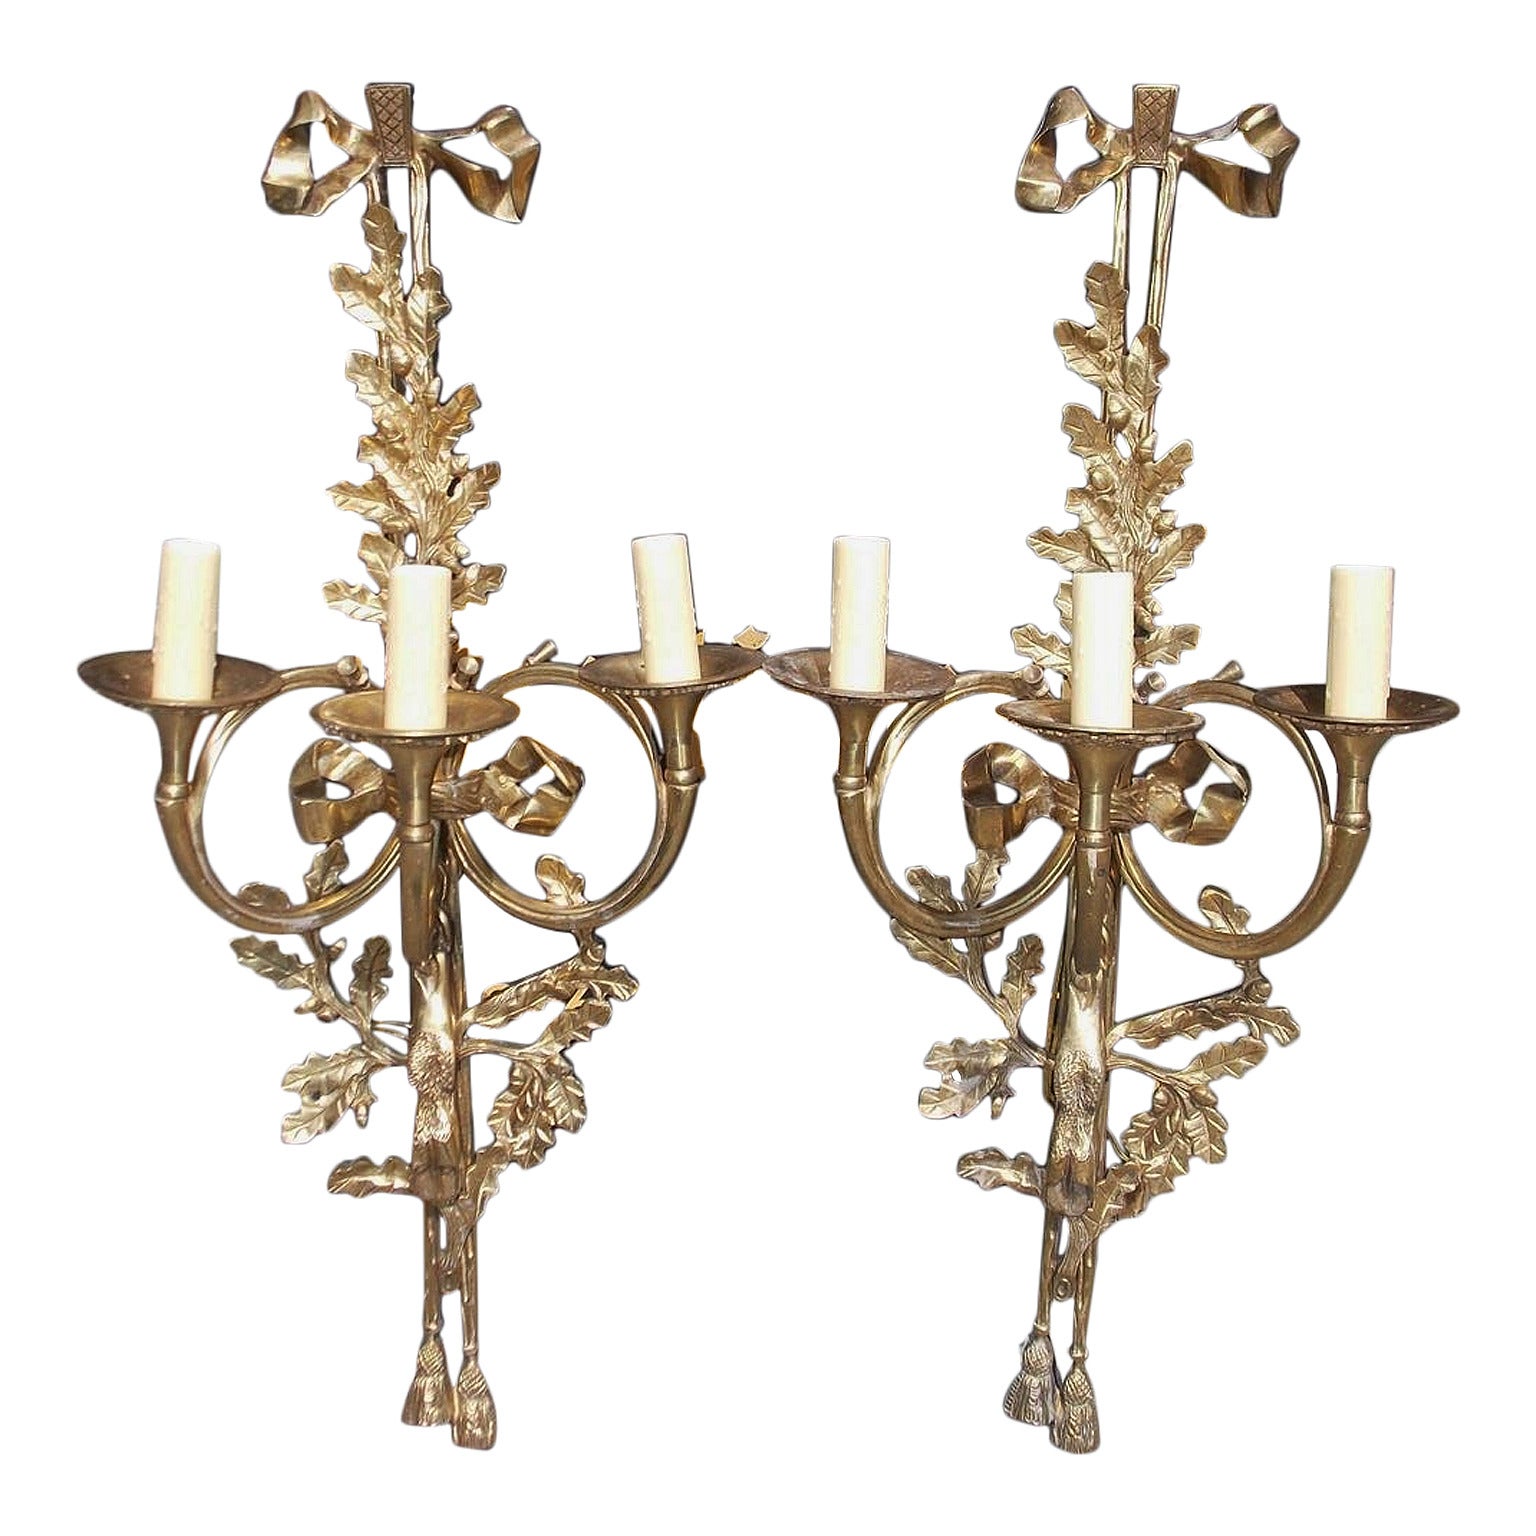 Pair of English Regency Floral and Game Mounted Gilt Sconces, Circa 1790 For Sale